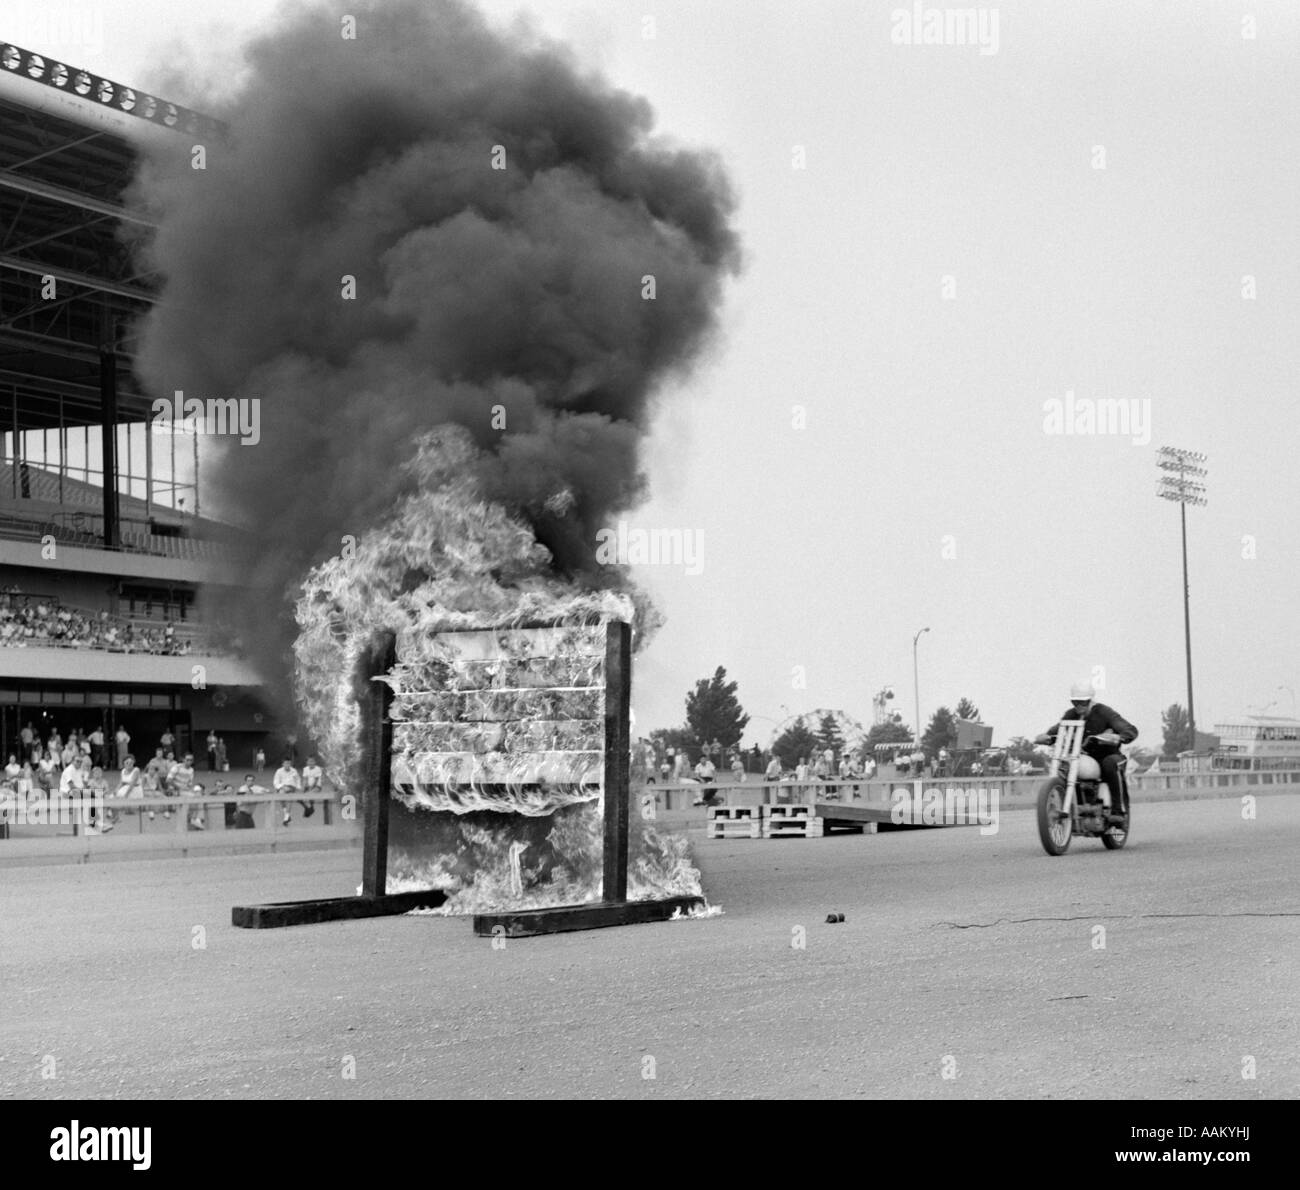 1960s DAREDEVIL ON MOTORCYCLE APPROACHING WALL OF FIRE Stock Photo